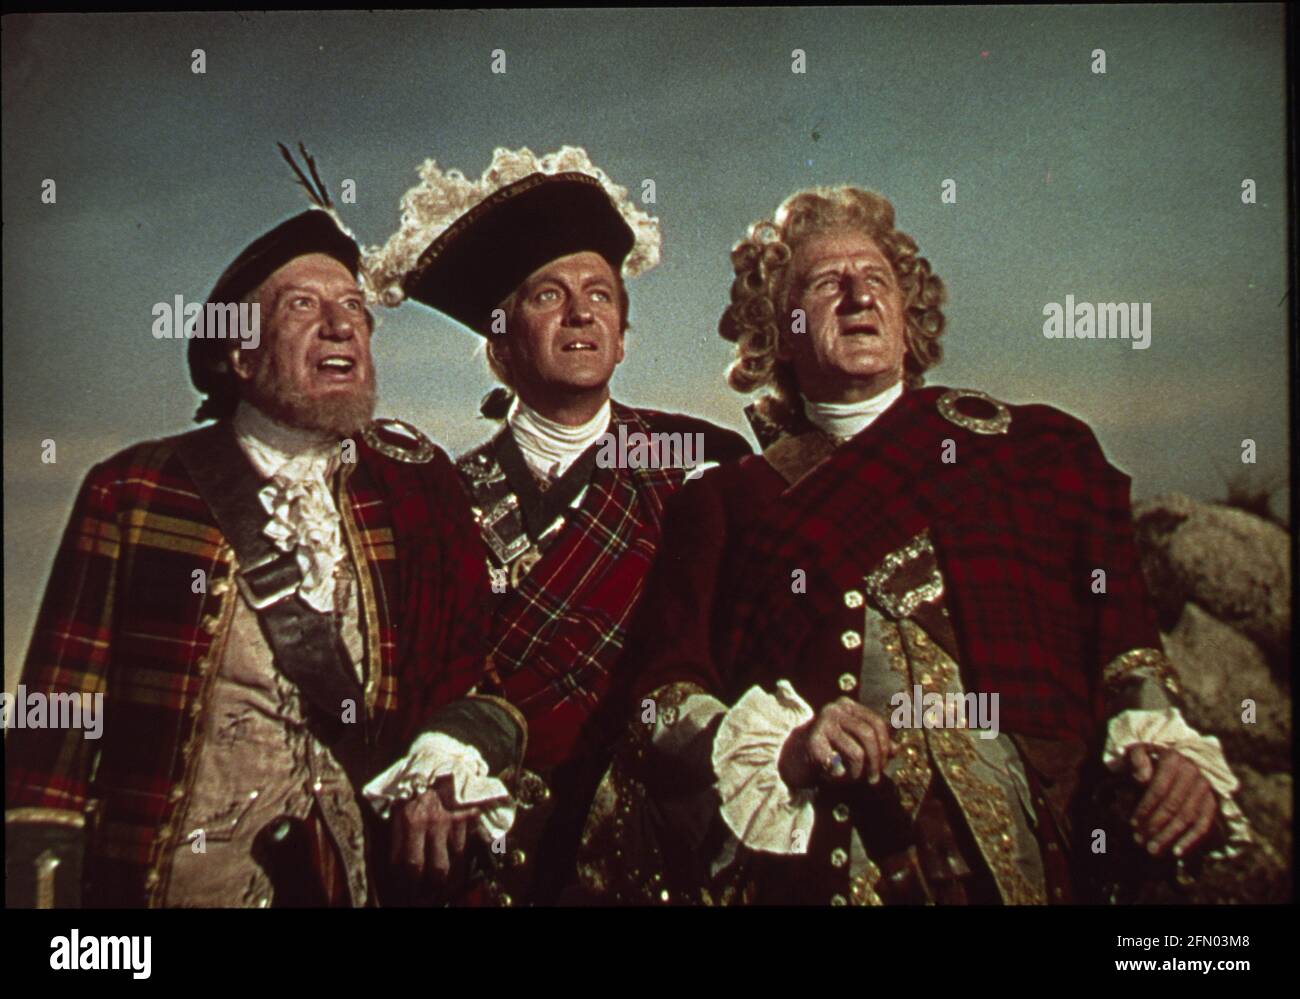 Bonnie Prince Charlie (1948) Franklin Dyall, David Niven, Finlay Currie, Date: 1948 Banque D'Images